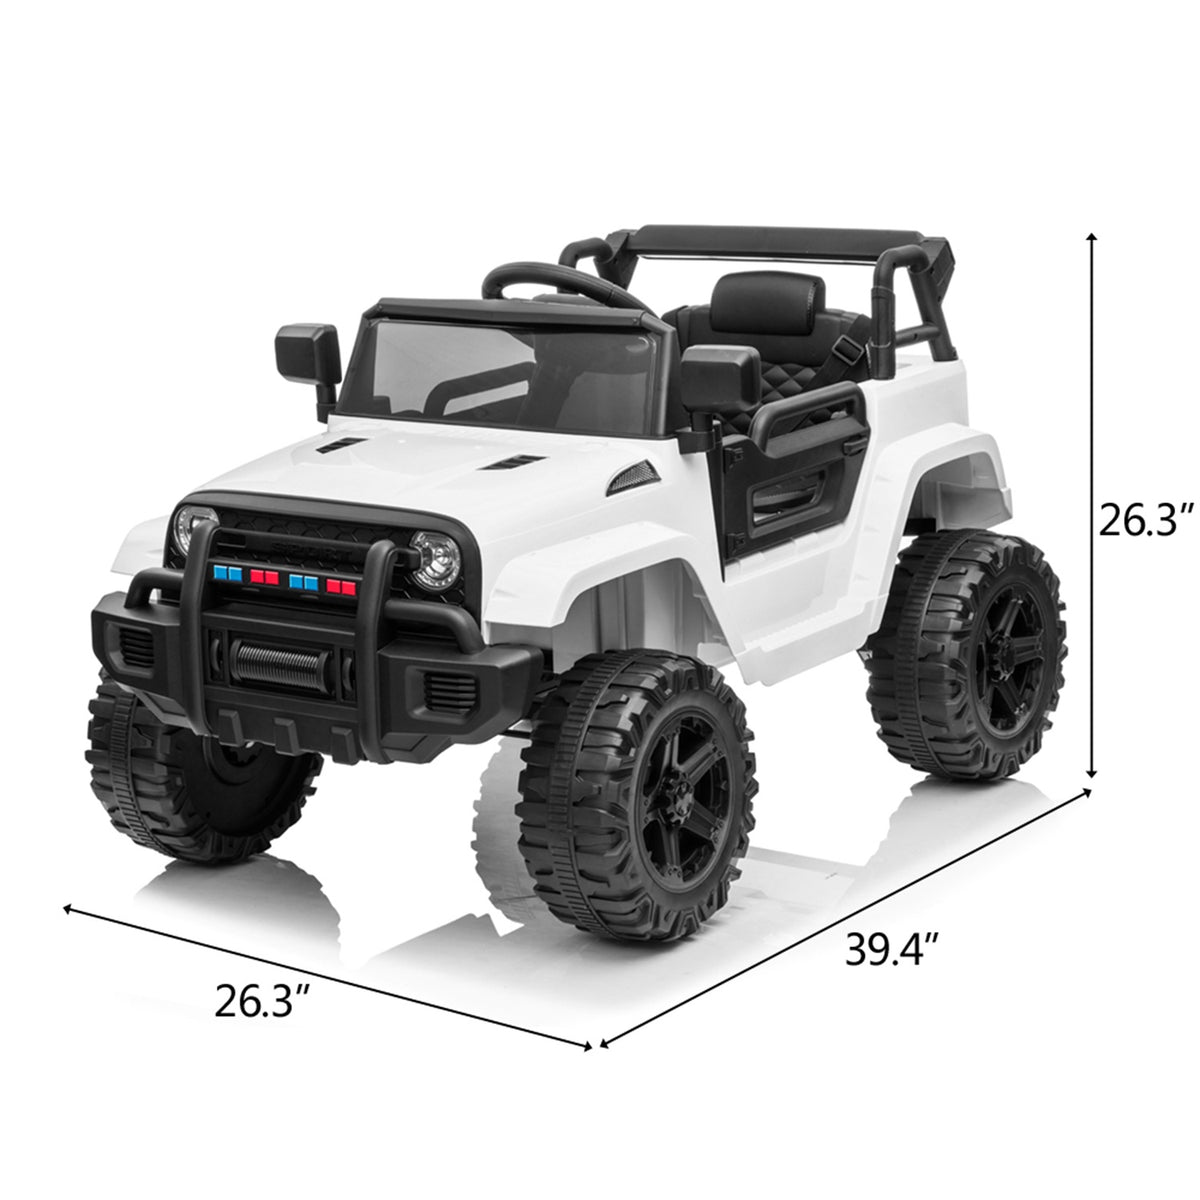 Kids Ride On Truck, Remote Control Kids Electric Ride-on Car, 12V Battery Motorized Vehicles Age 3-5 with 3 Speeds (White)